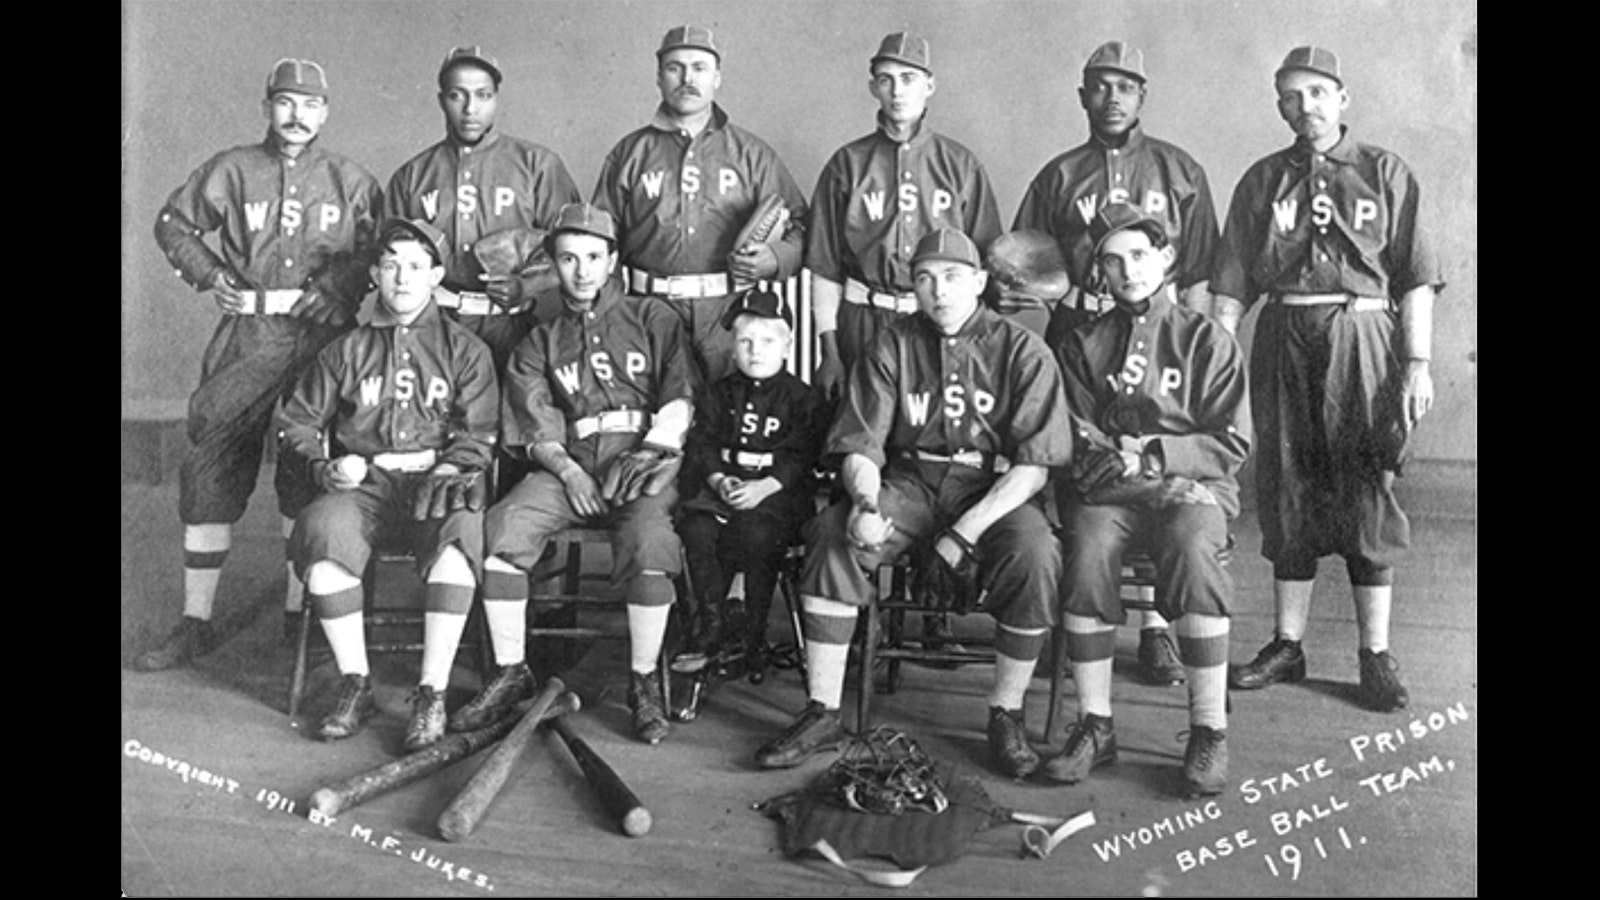 A professional team photo of the Wyoming State Penitentiary All-Stars taken by prominent Rawlins photographer M.F. Jukes.